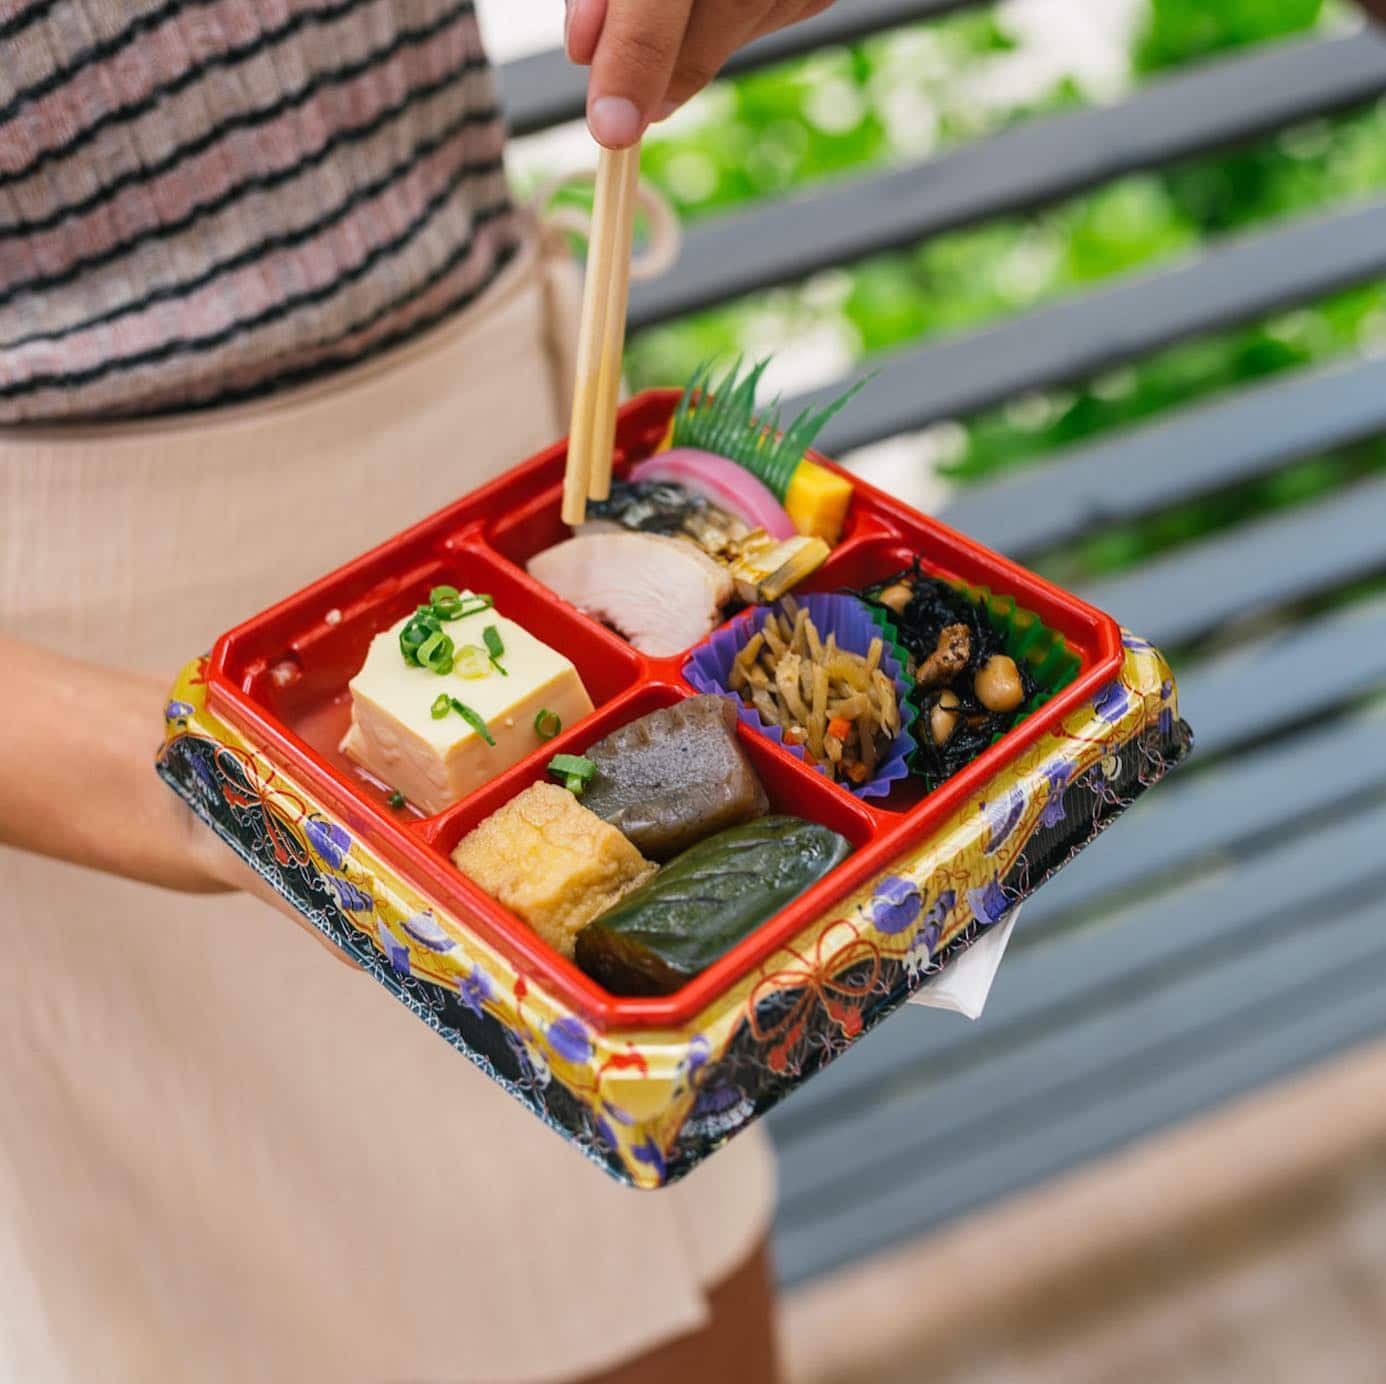 Who knew bentos could be so beautiful? Visit Japanese restaurant Rinka at their location next to Whole Foods or at their stall in Kaka’ako Farmers Market every Saturday to try these bentos for yourself!